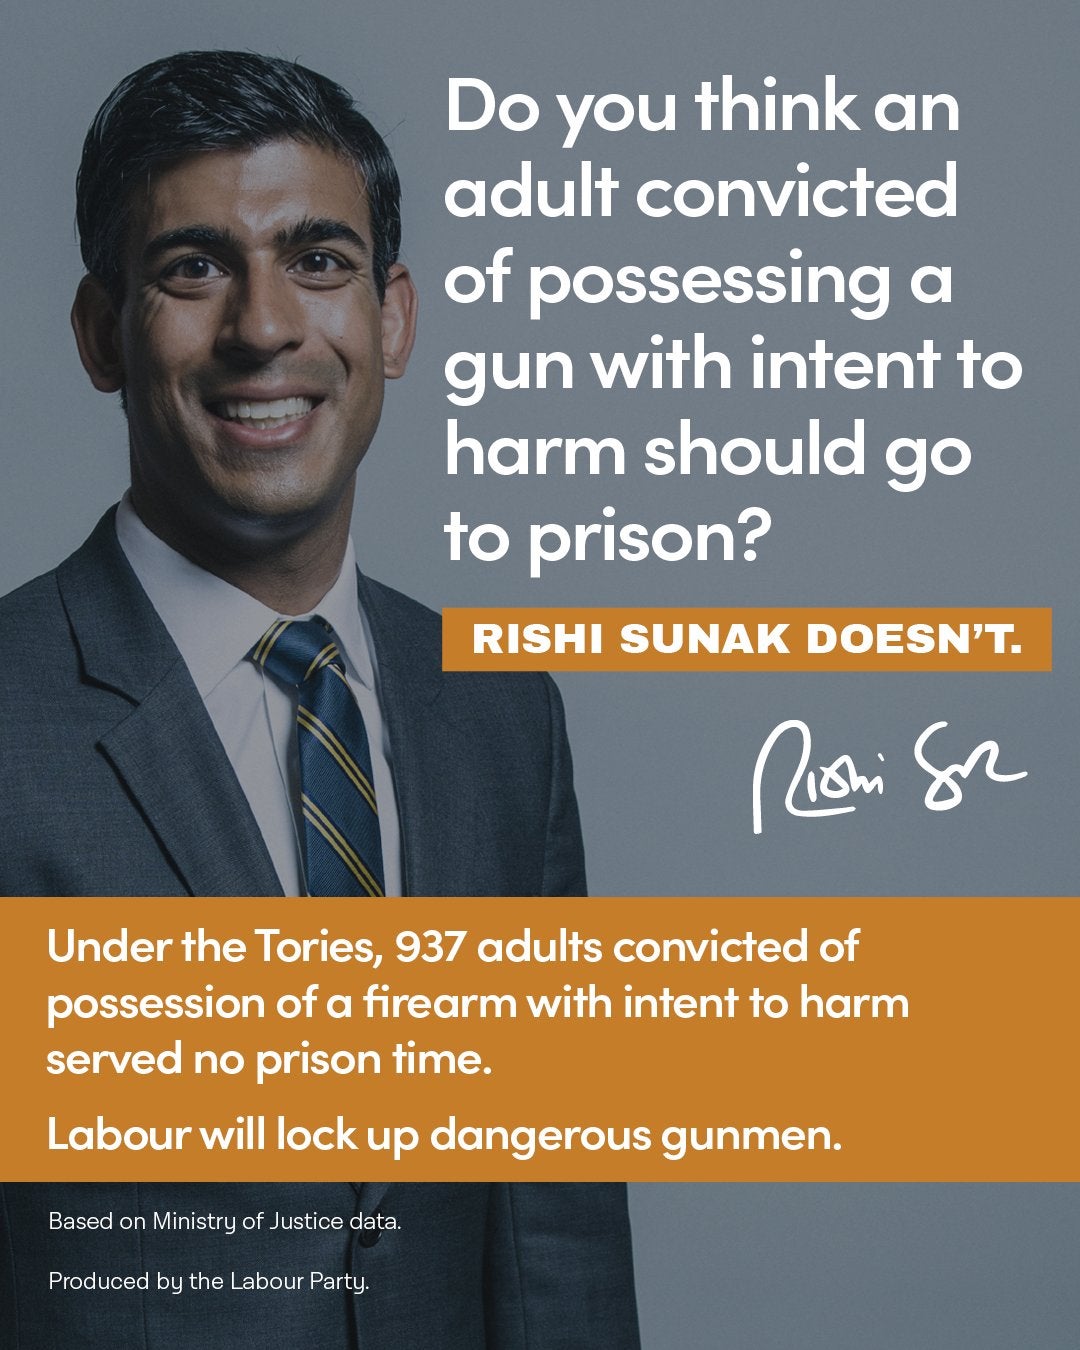 A second advert claims that Rishi Sunak doesn’t think people convicted of possessing guns with intent to harm should go to prison